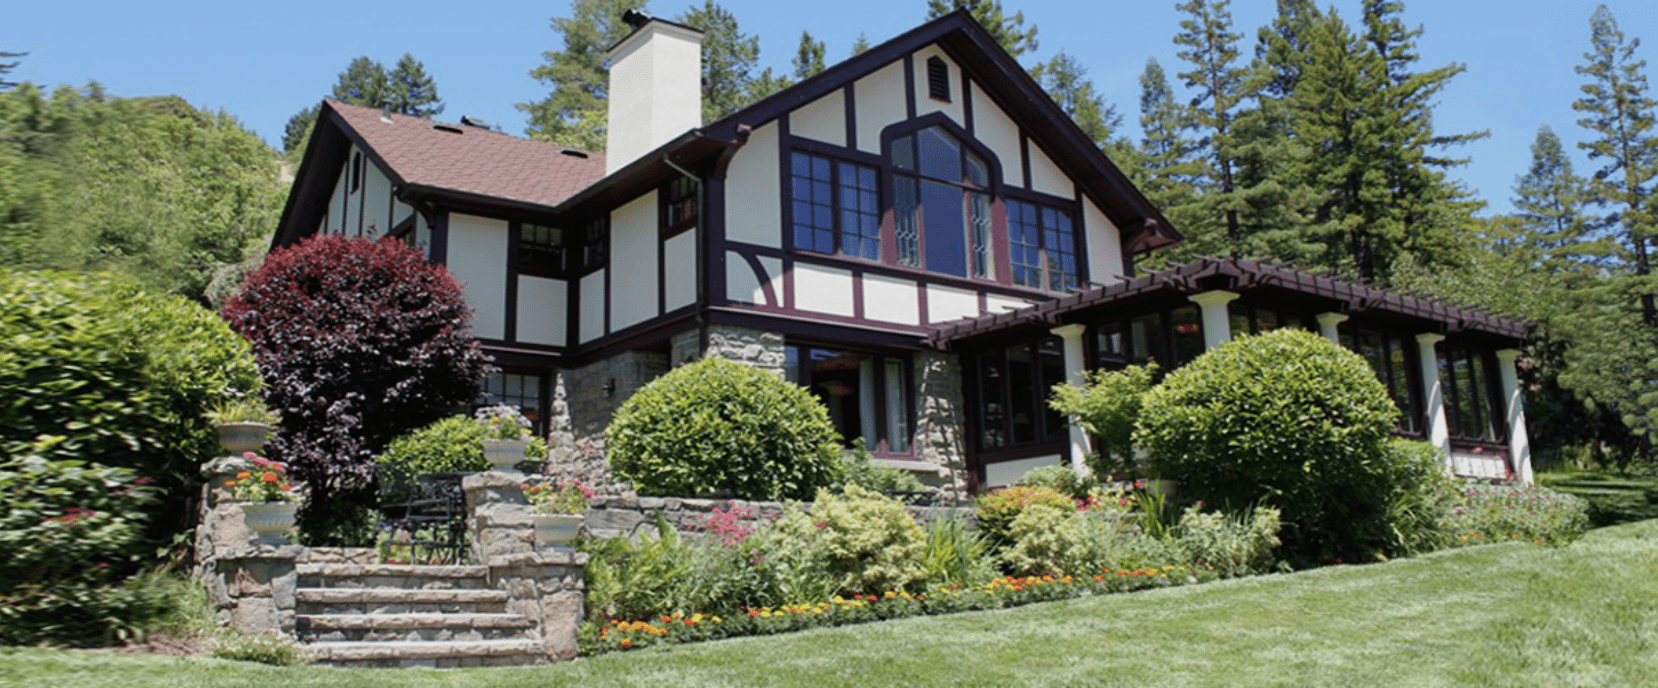 banner image is of exterior of the Julia Morgan Redwood Grove House